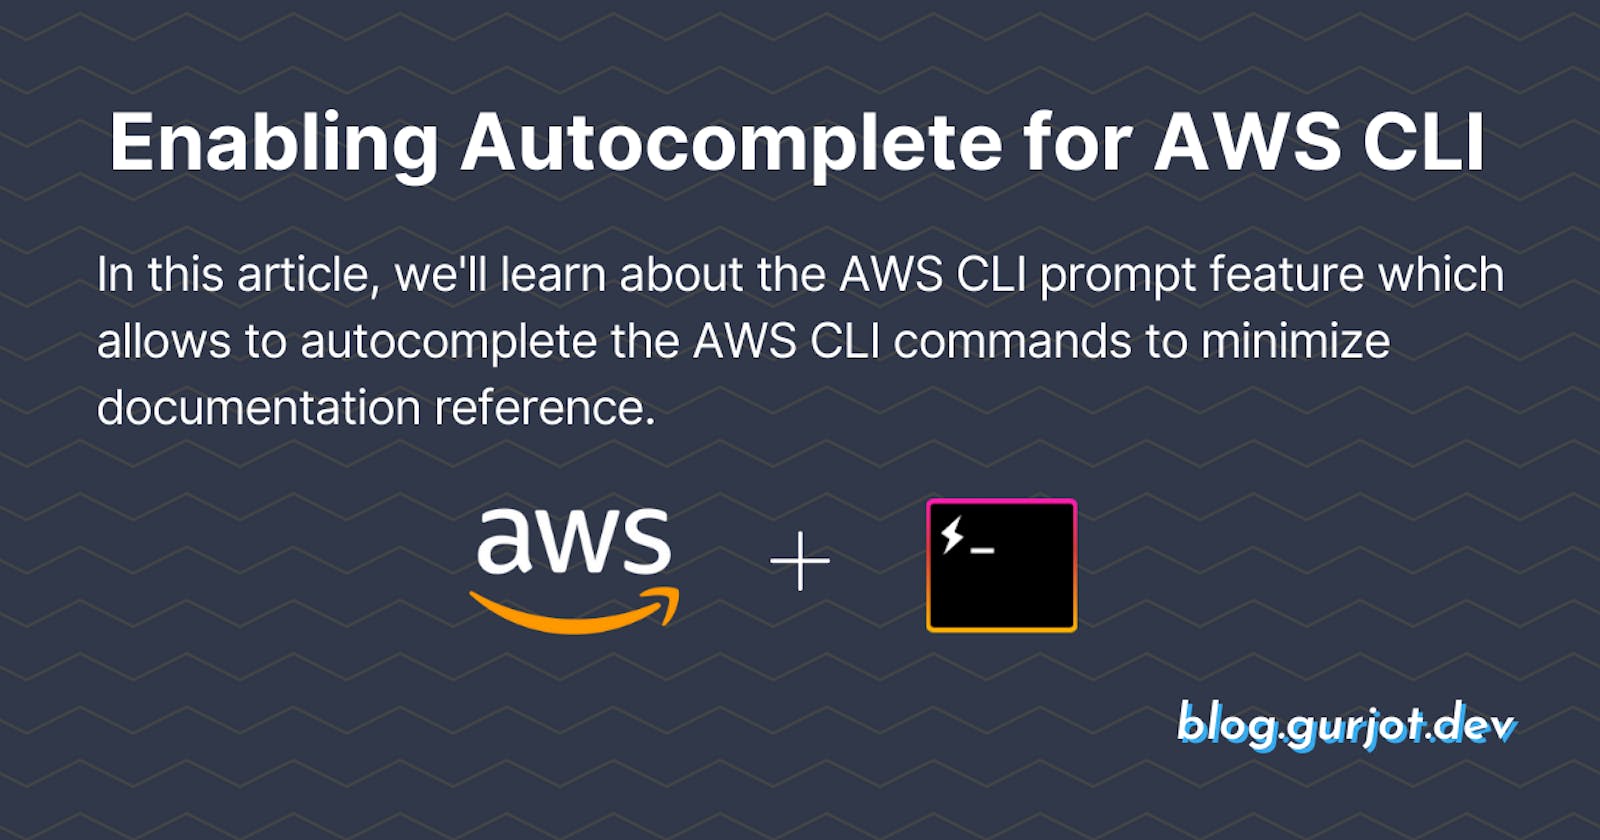 Enabling Autocomplete for AWS CLI